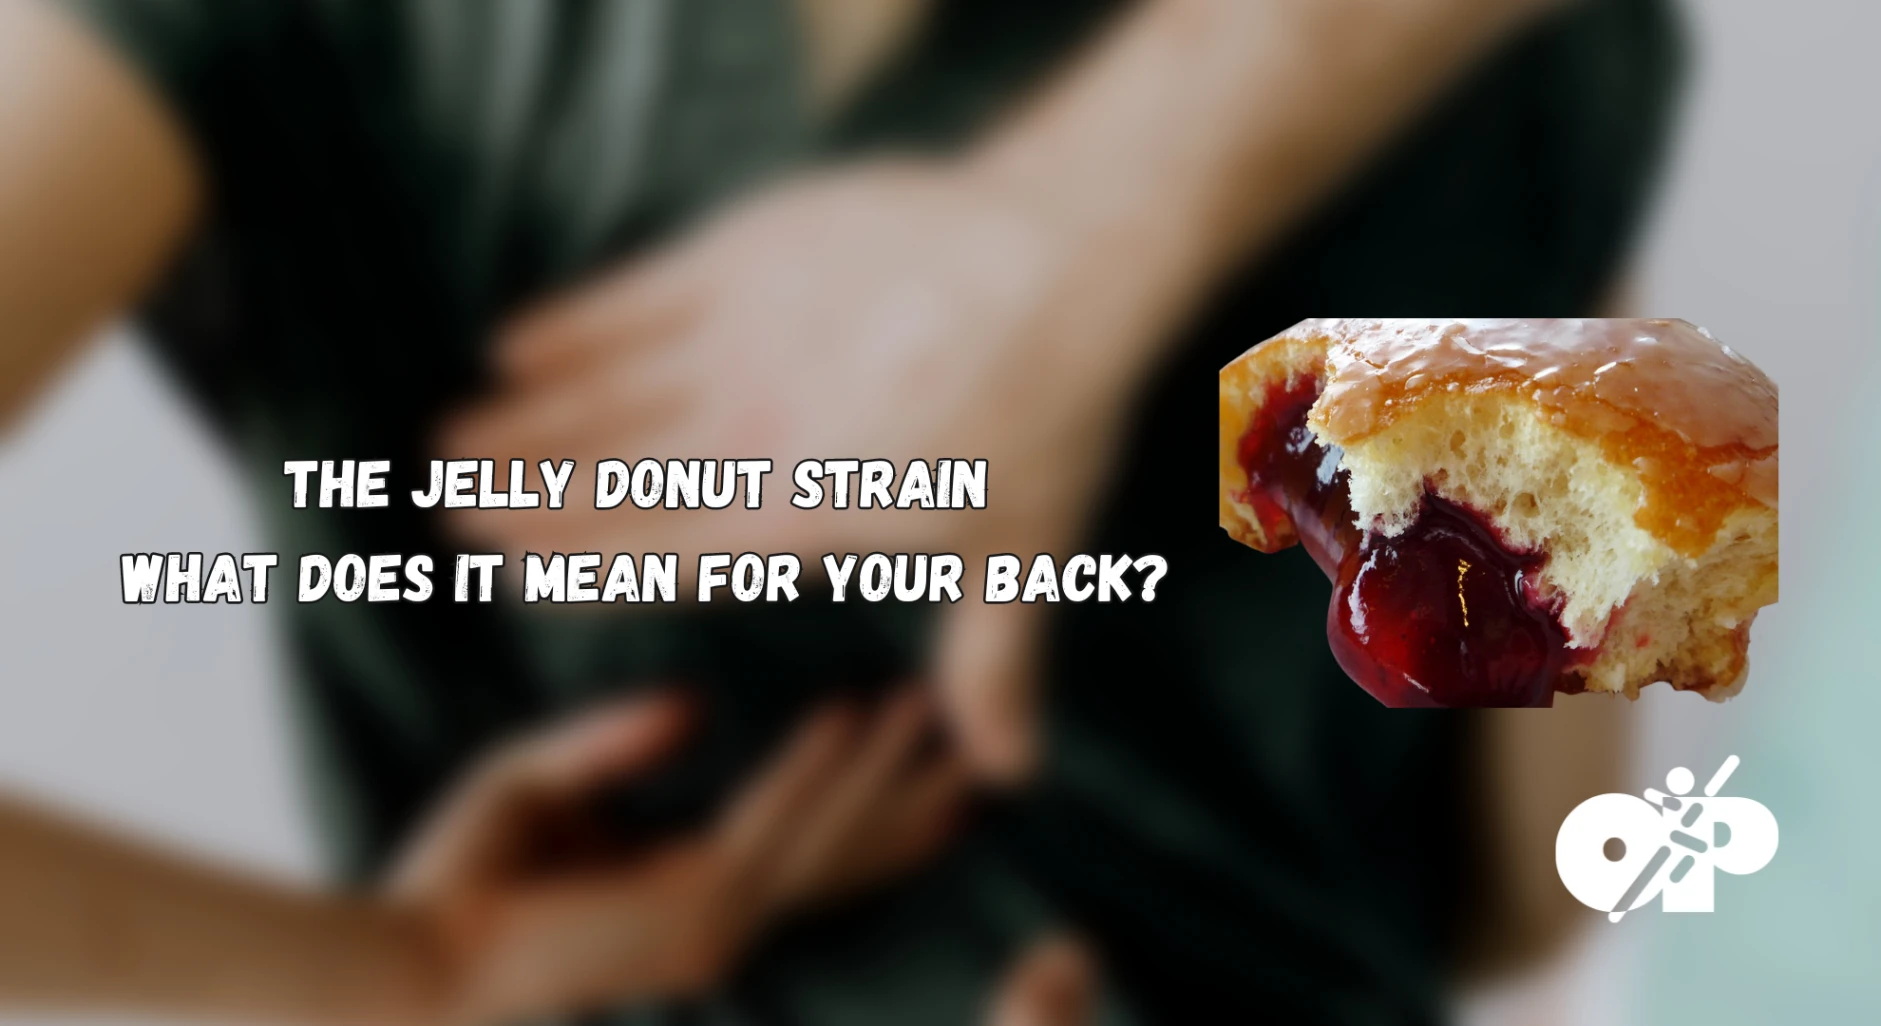 20.-The-Jelly-Donut-Strain-–-What-Does-it-Mean-for-your-back